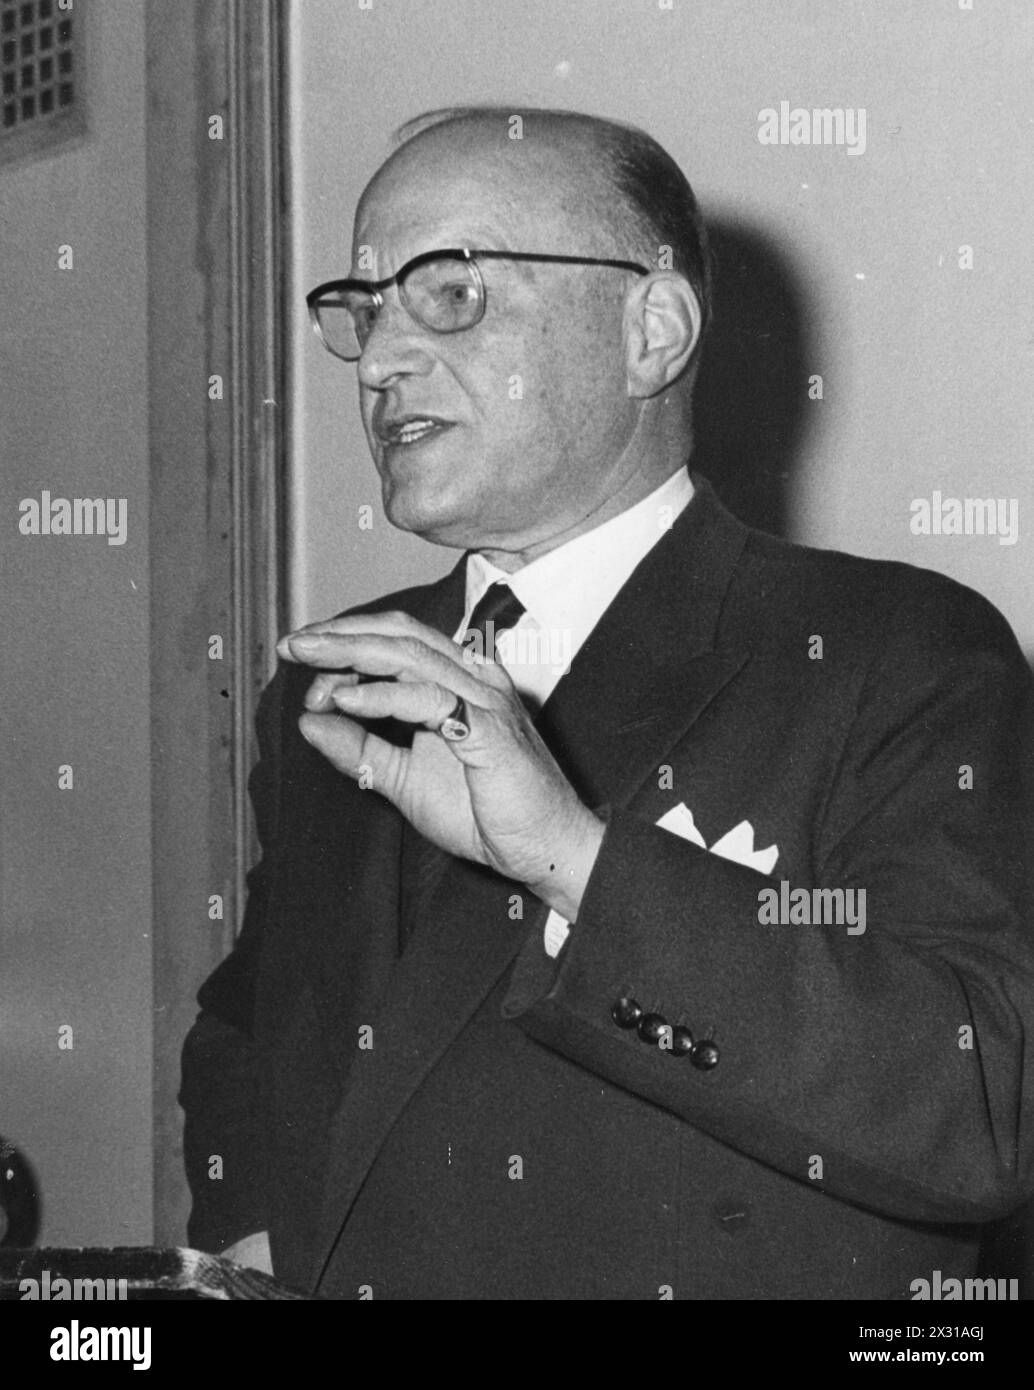 Semler, Johannes Ferdinand, 16.12.1898 - 31.1,1973, ADDITIONAL-RIGHTS-CLEARANCE-INFO-NOT-AVAILABLE Foto Stock